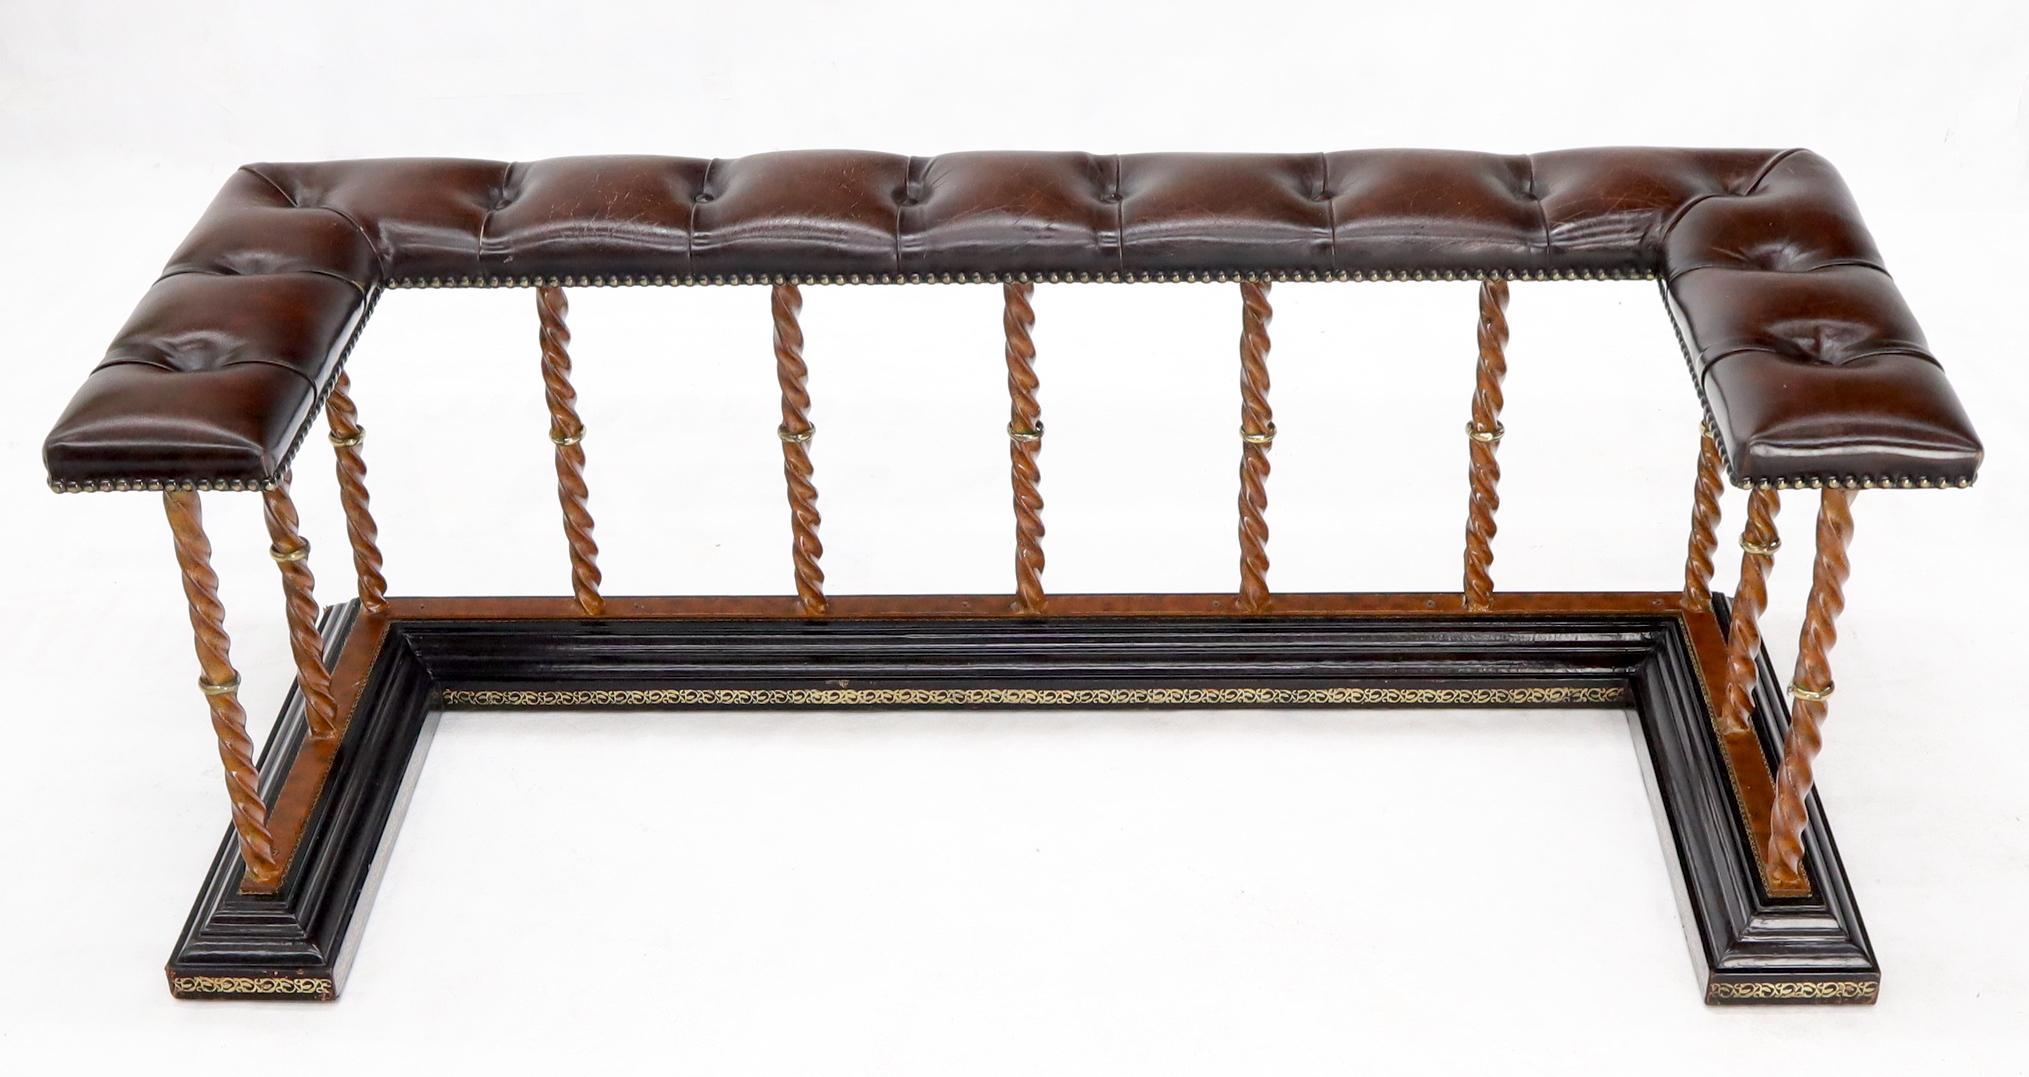 Tufted Leather Upholstery Wrought Iron Base Fireplace Bench 6